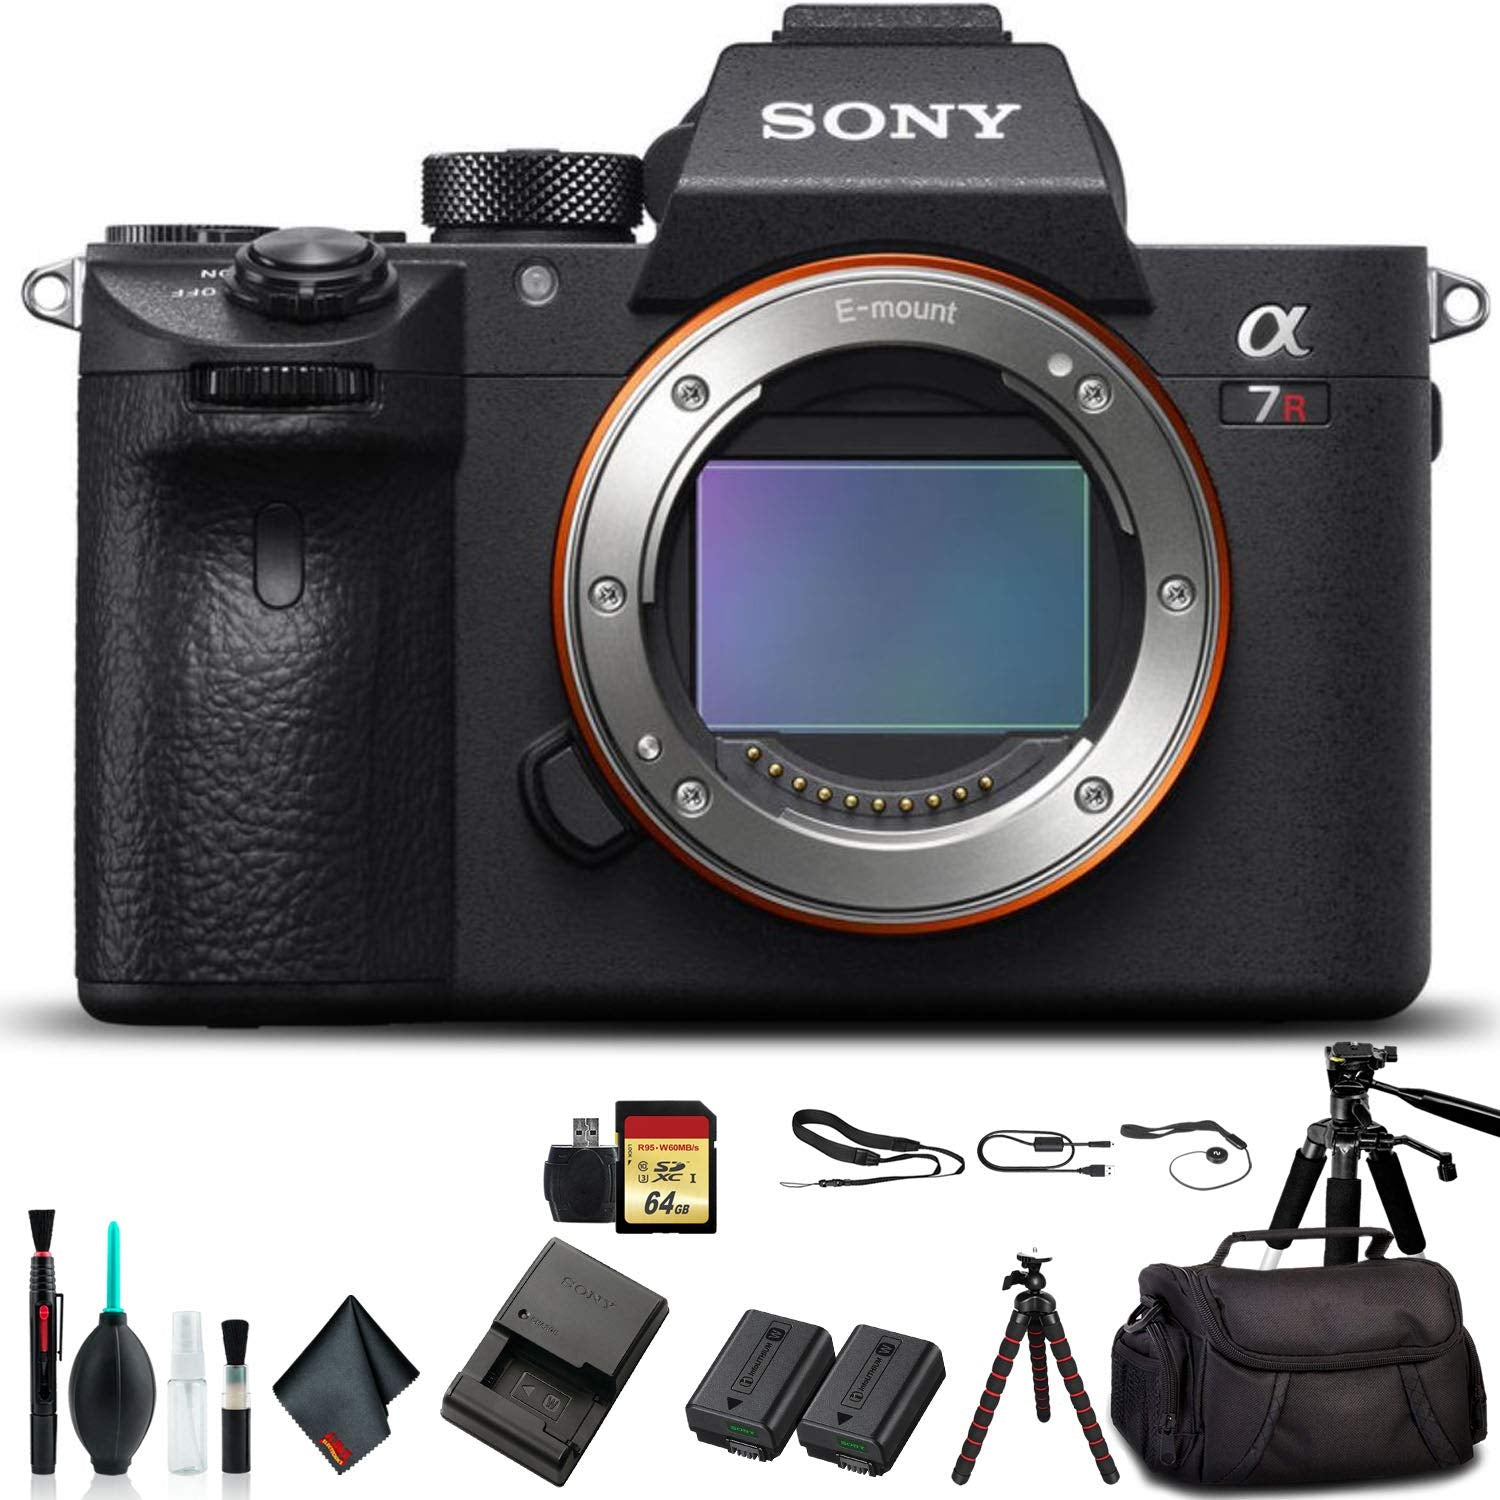 Sony Alpha a7R III Mirrorless Camera ILCE7RM3/B With Soft Bag, Tripod, Additional Battery, 64GB Memory Card, Card Reader , Plus Essential Accessories